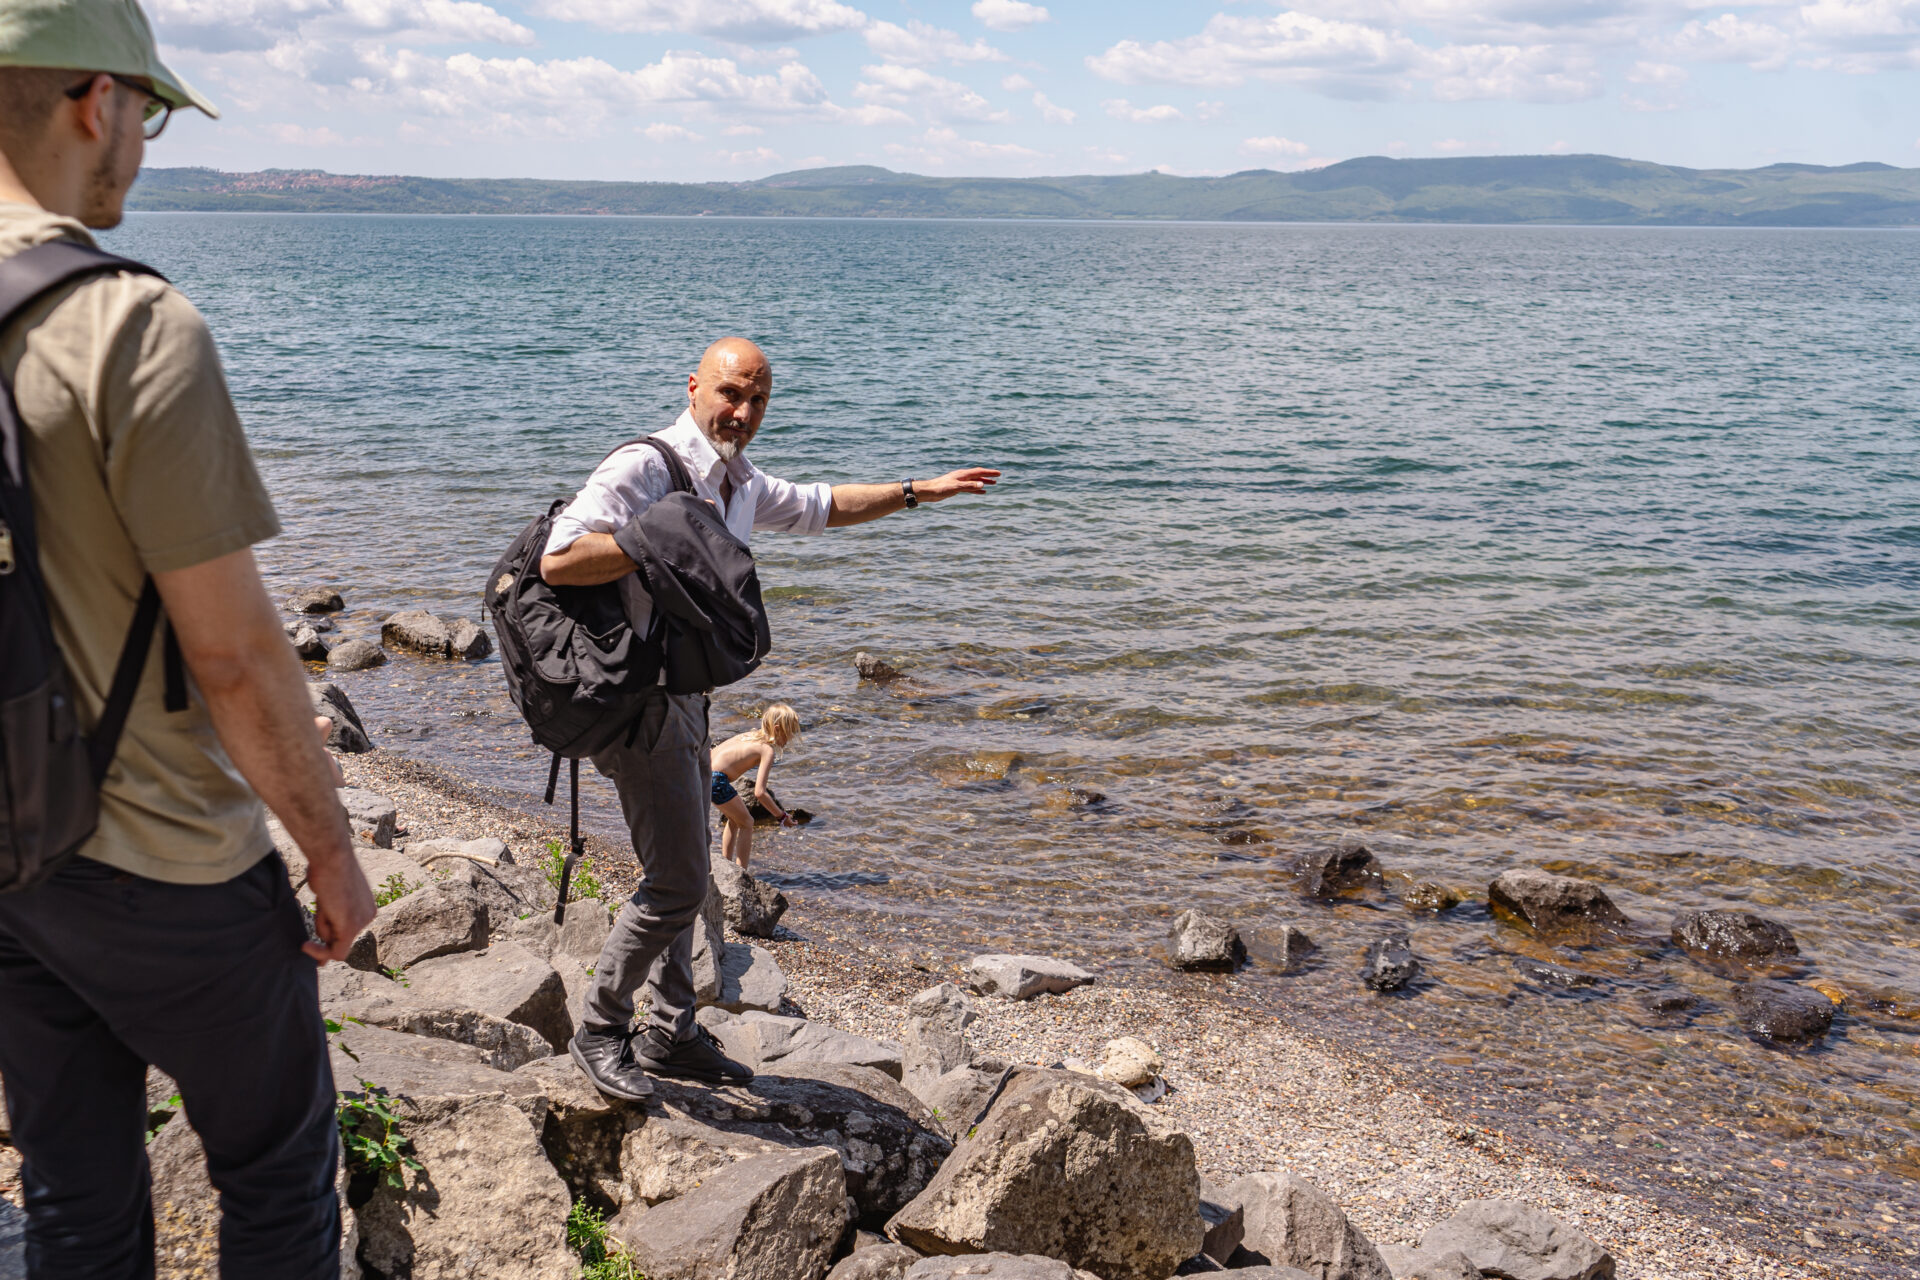 Francesco Falconi points to the rock he used to dive from when he was younger, showing how much the lake has receded. (Federico Ambrosini)